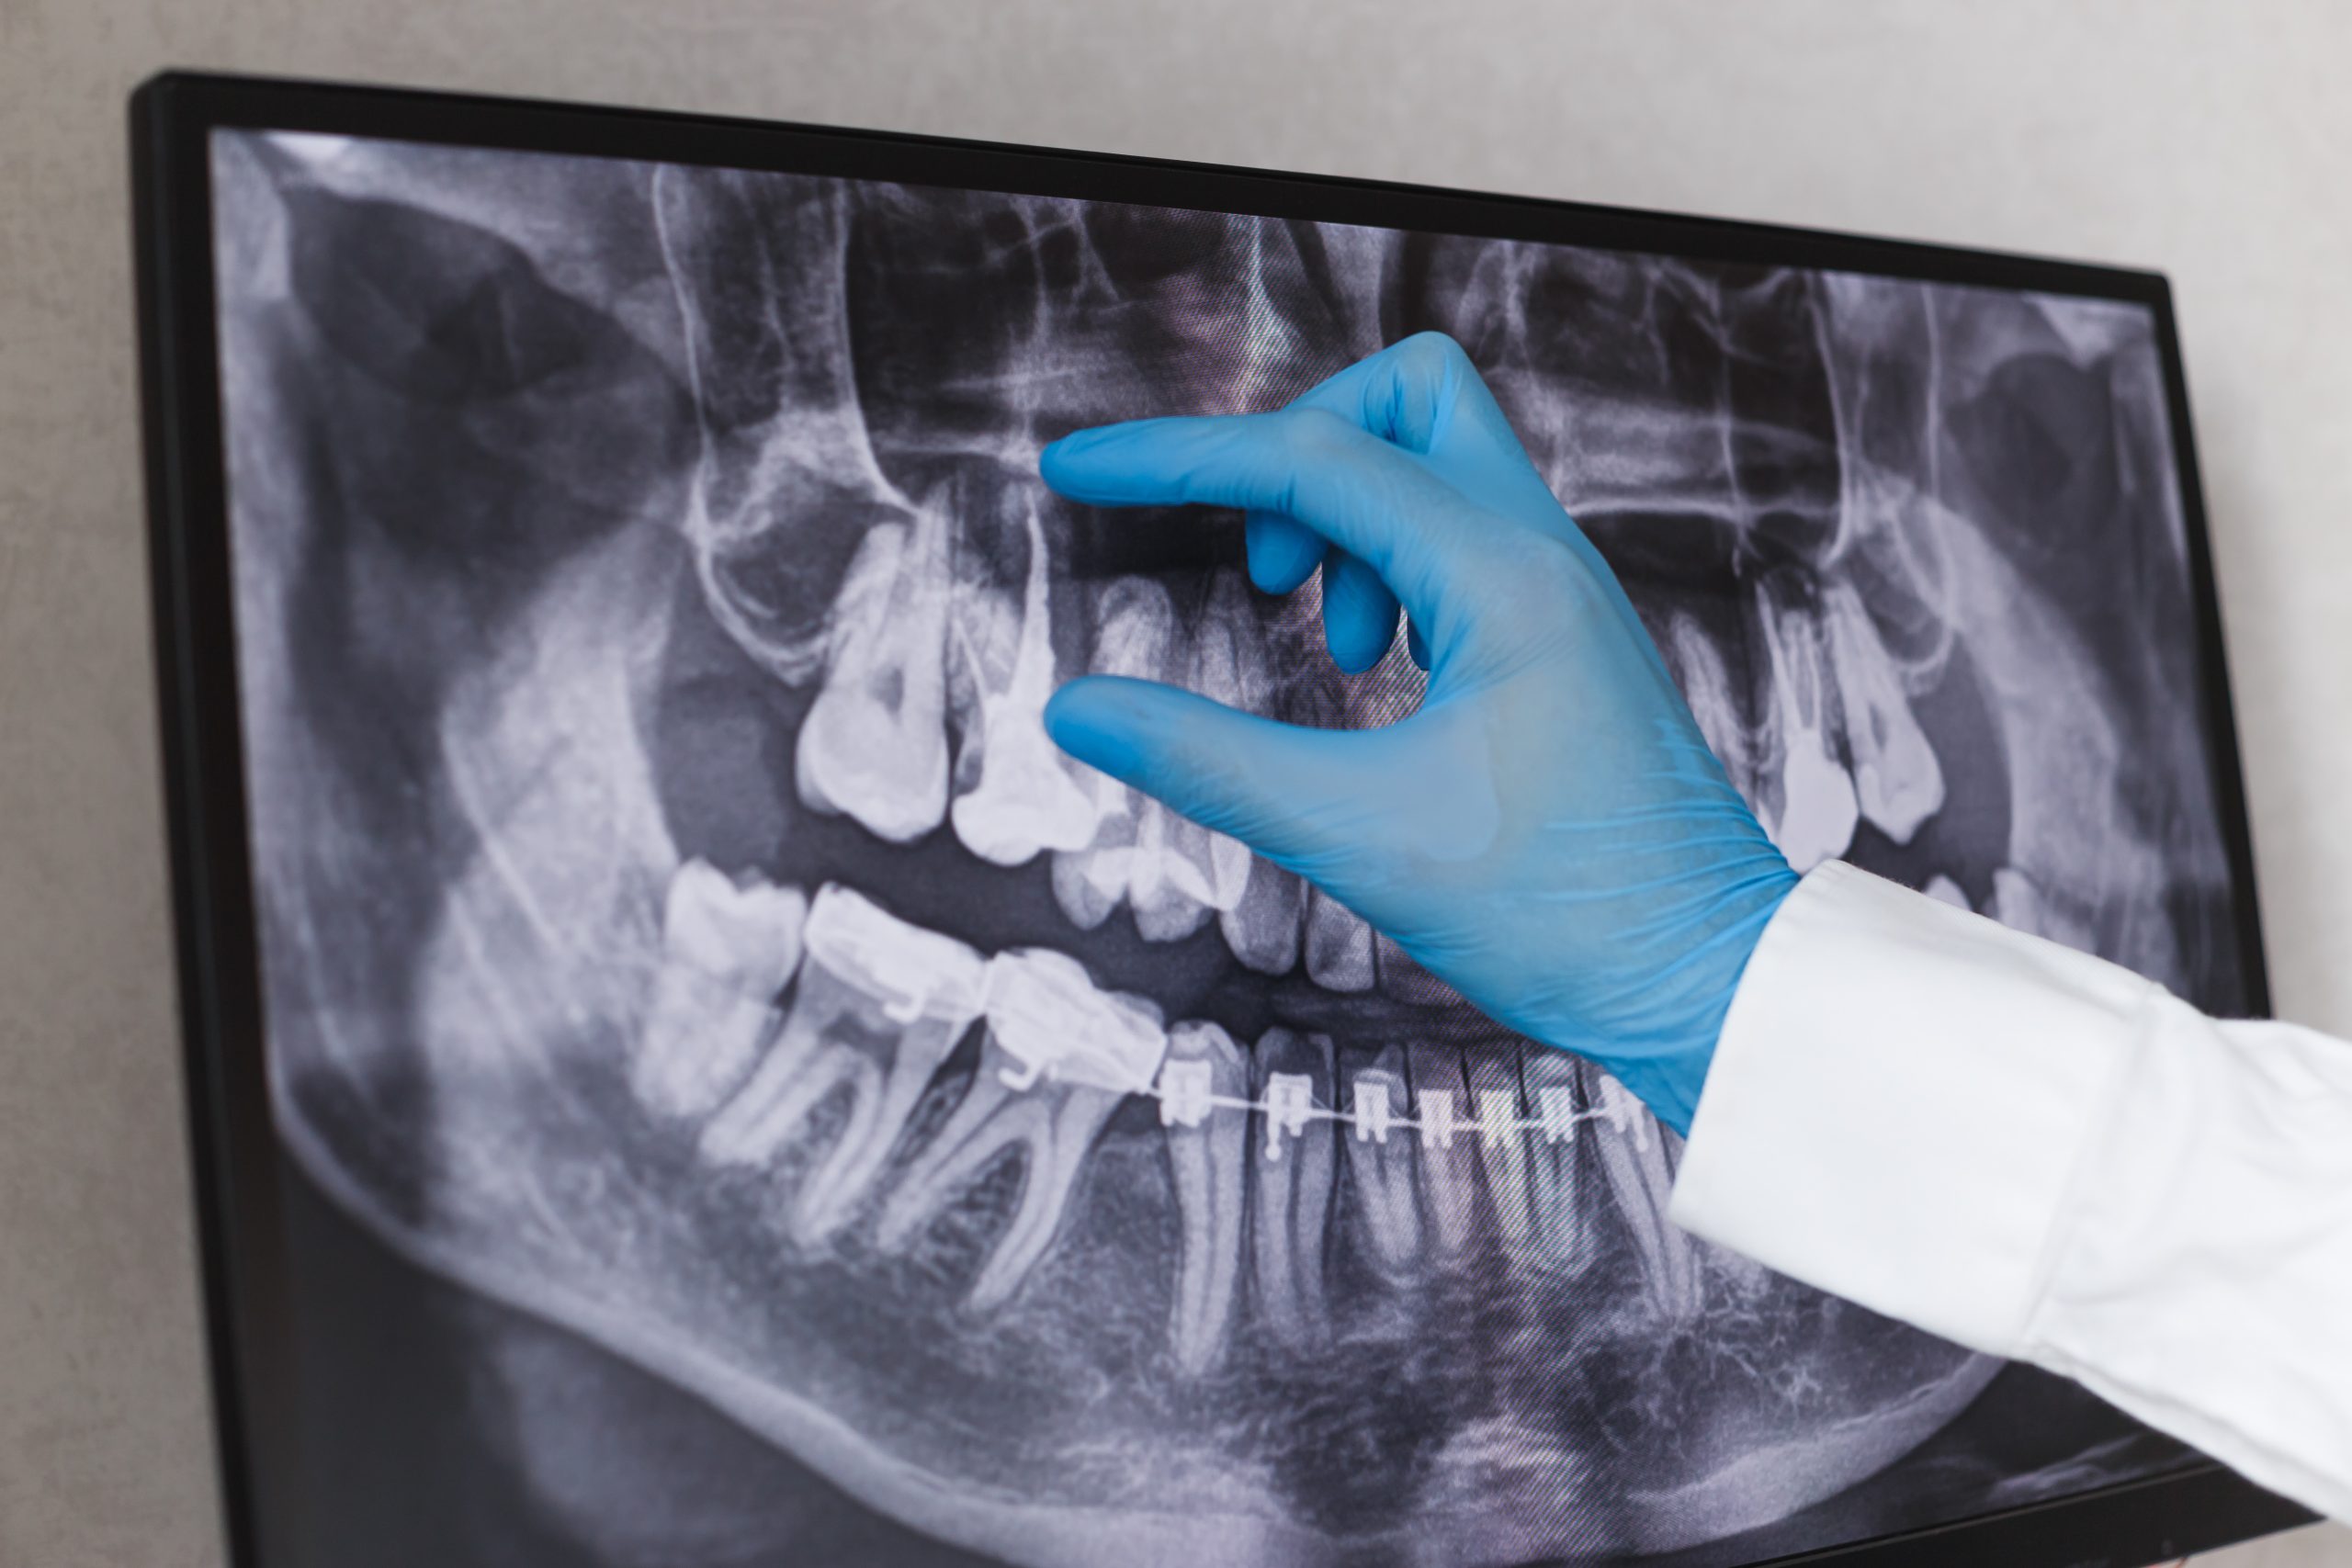 Doctor Points To Filled Root Canal In Dental X Ray